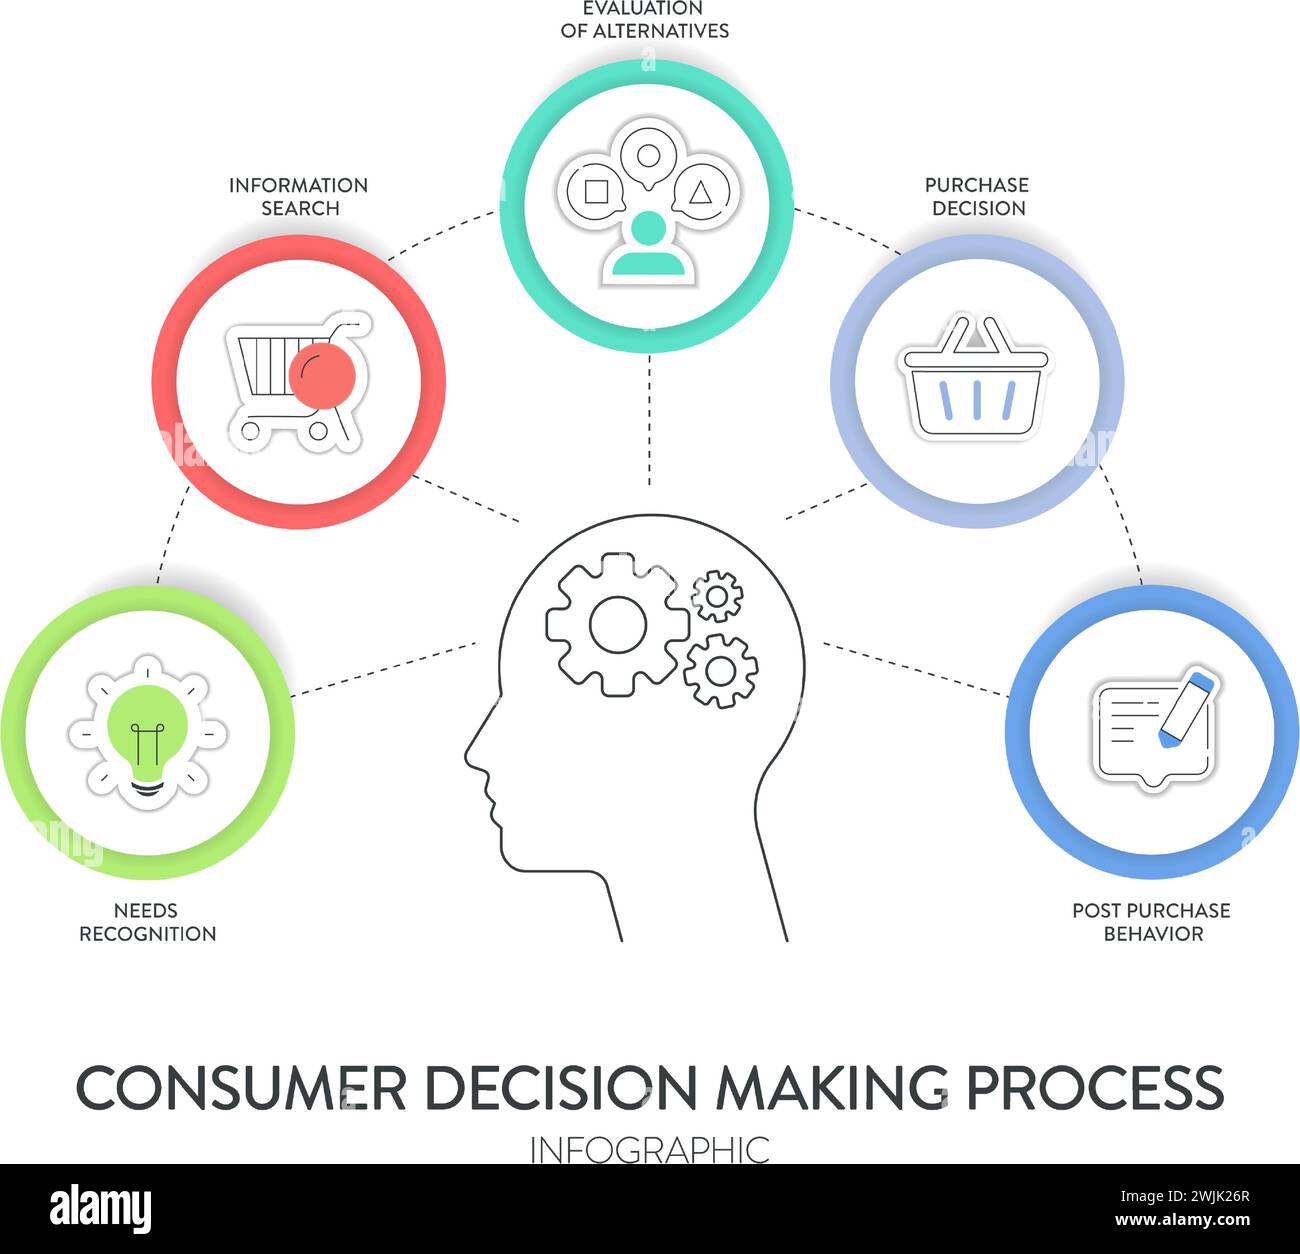 Consumer decision making process framework infographic diagram chart illustration banner with icon vector has needs recognition, search, evaluation of Stock Vector